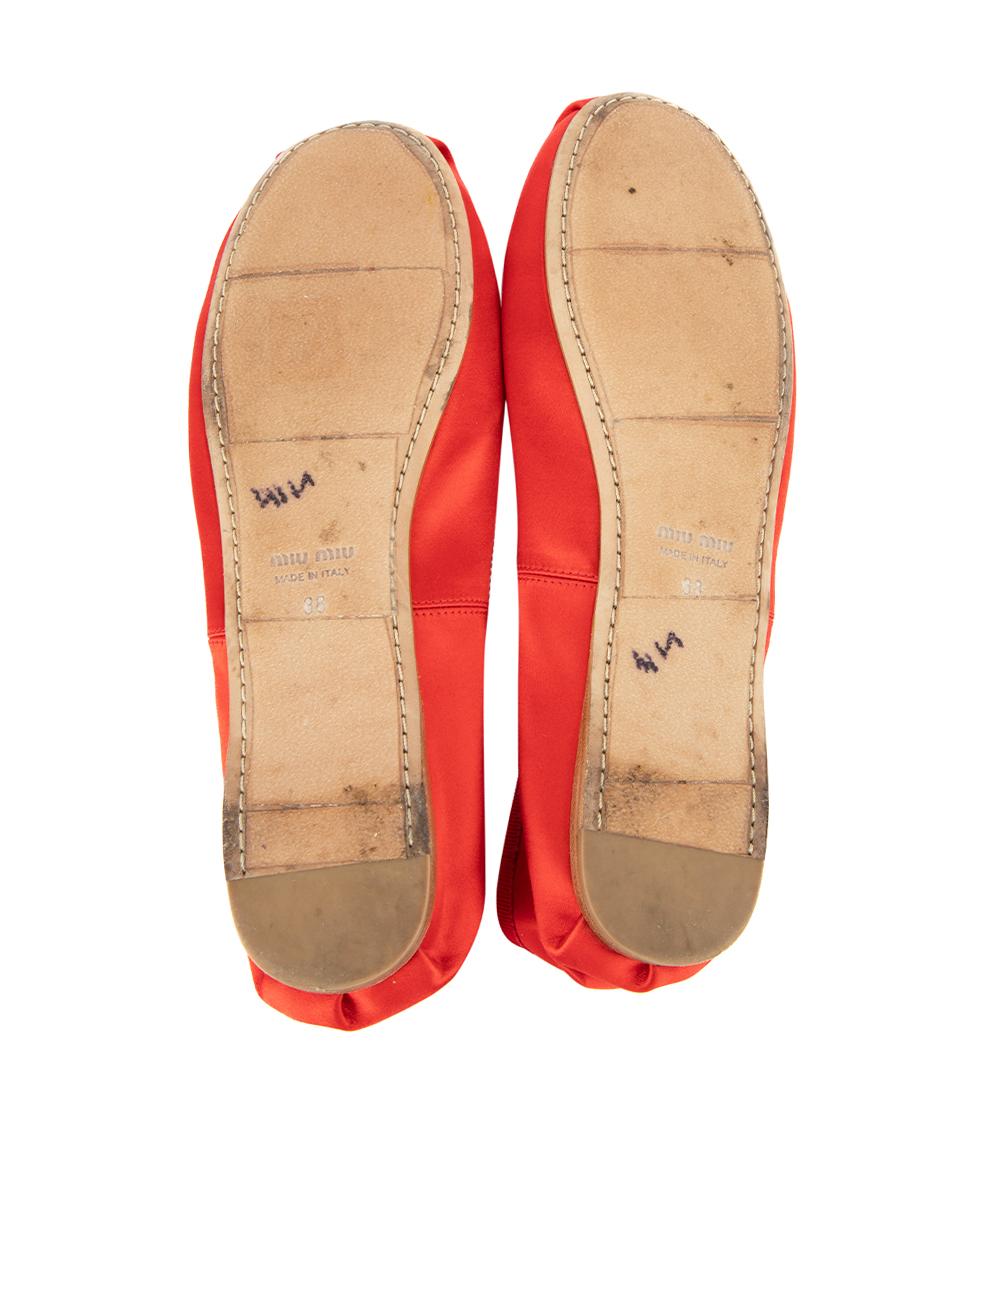 Pre-Loved Miu Miu Women's Red Satin Bow Accent Ballet Flats In Excellent Condition In London, GB